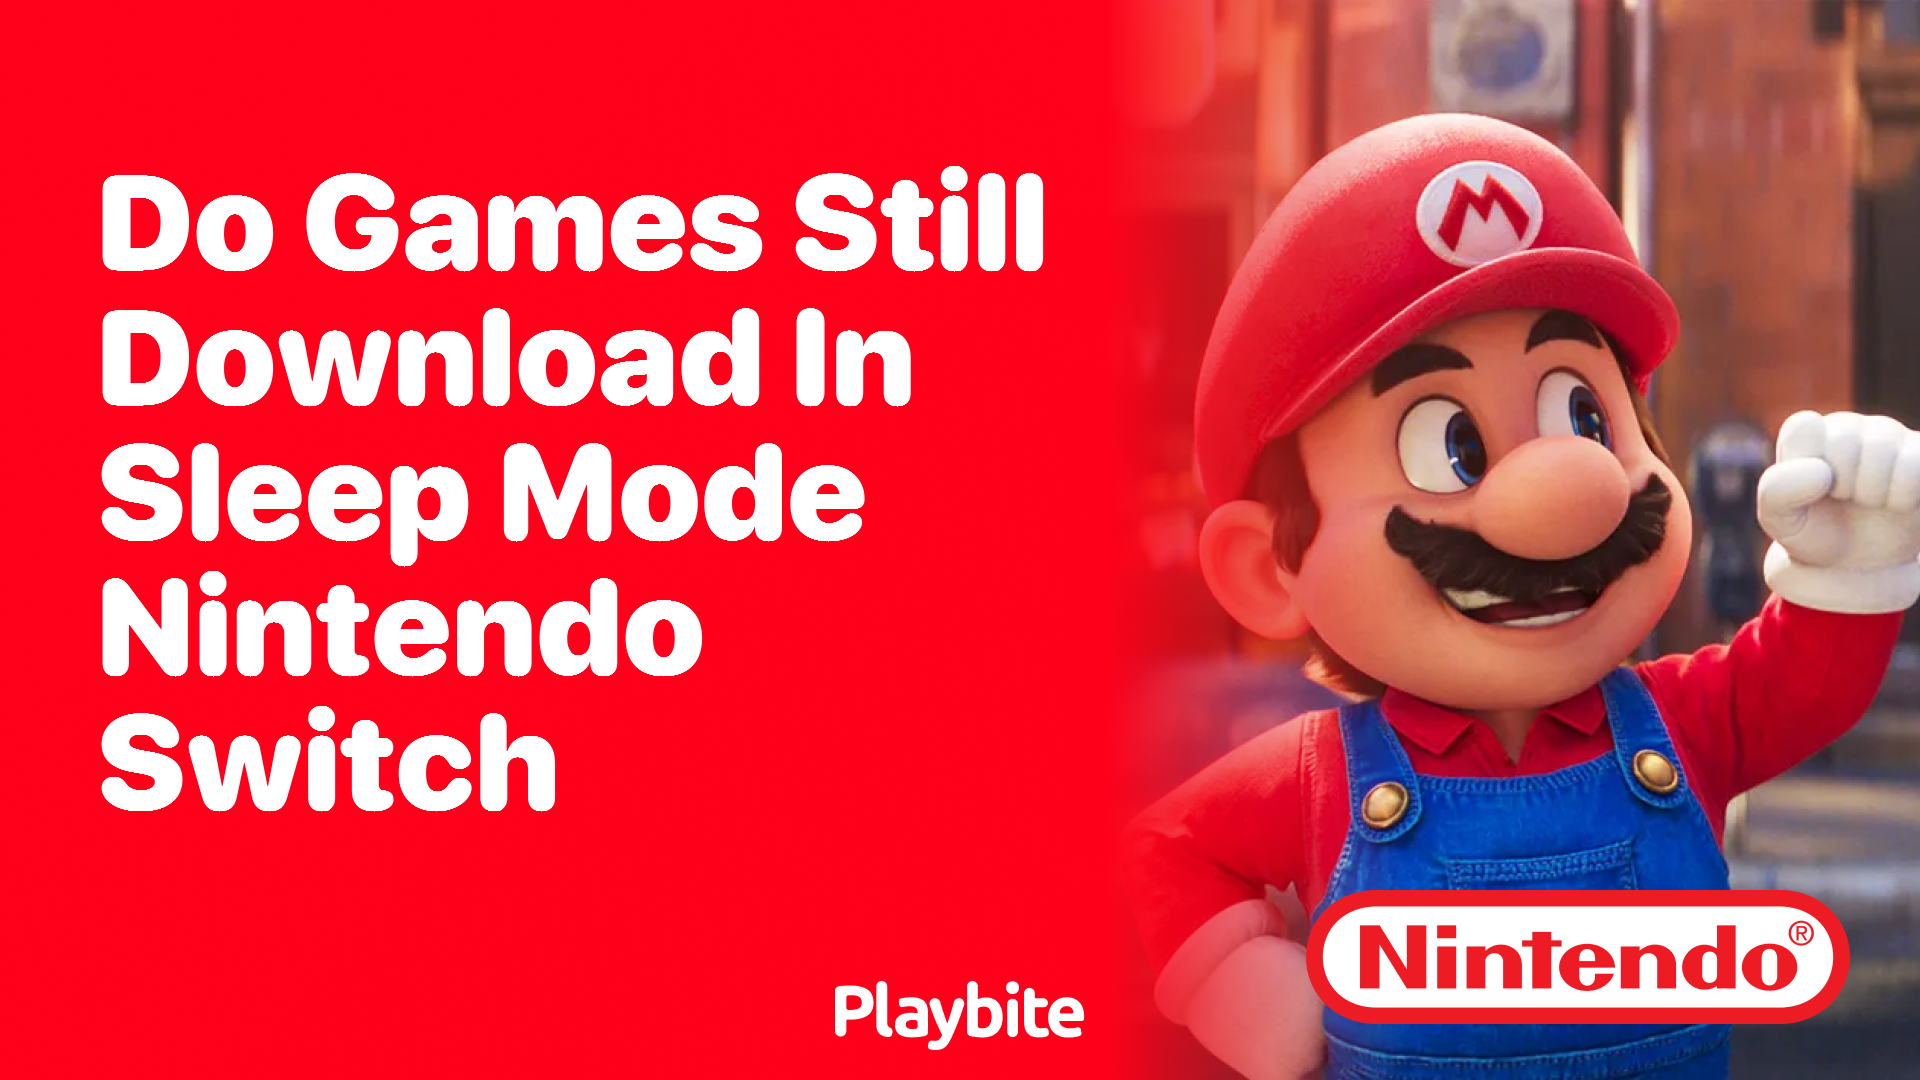 Do Games Still Download in Sleep Mode on Nintendo Switch?